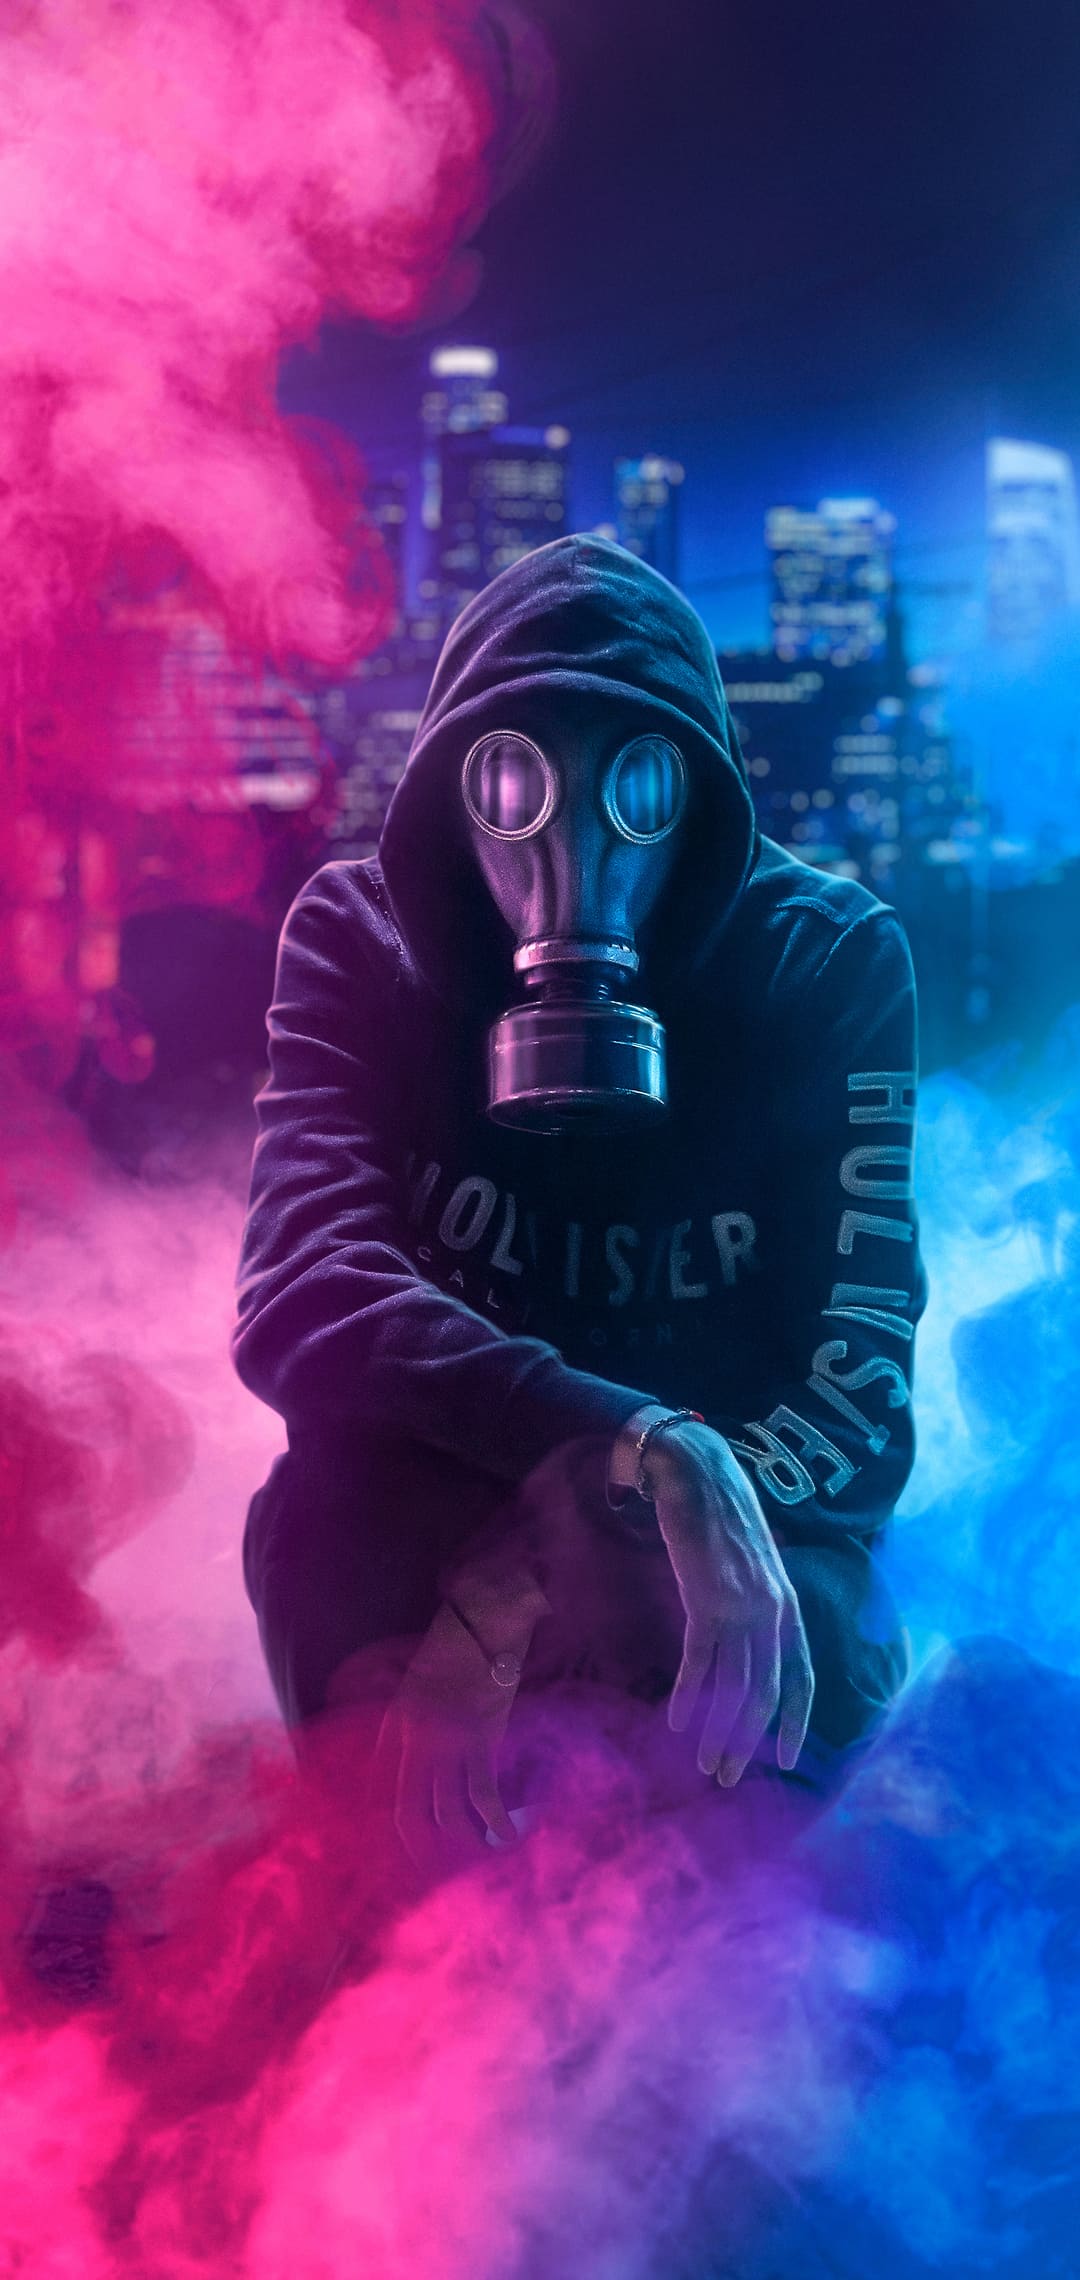 A man wearing gas mask and sitting on the ground - Neon